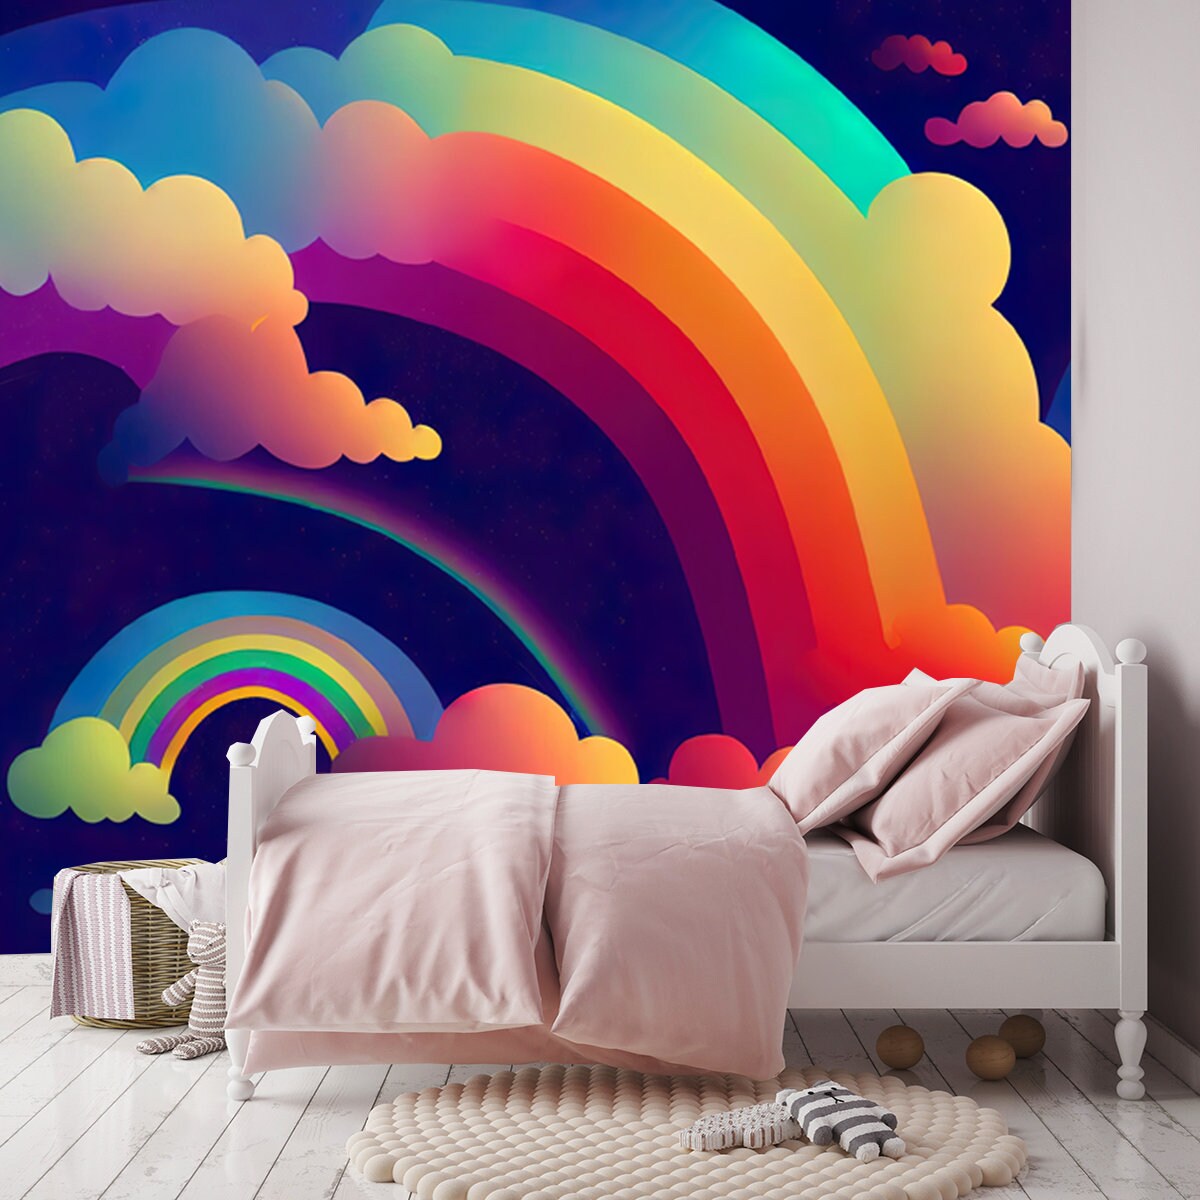 Holographic Fantasy Rainbow Unicorn Background with Clouds. Pastel Color Sky Wallpaper Girl Bedroom Mural